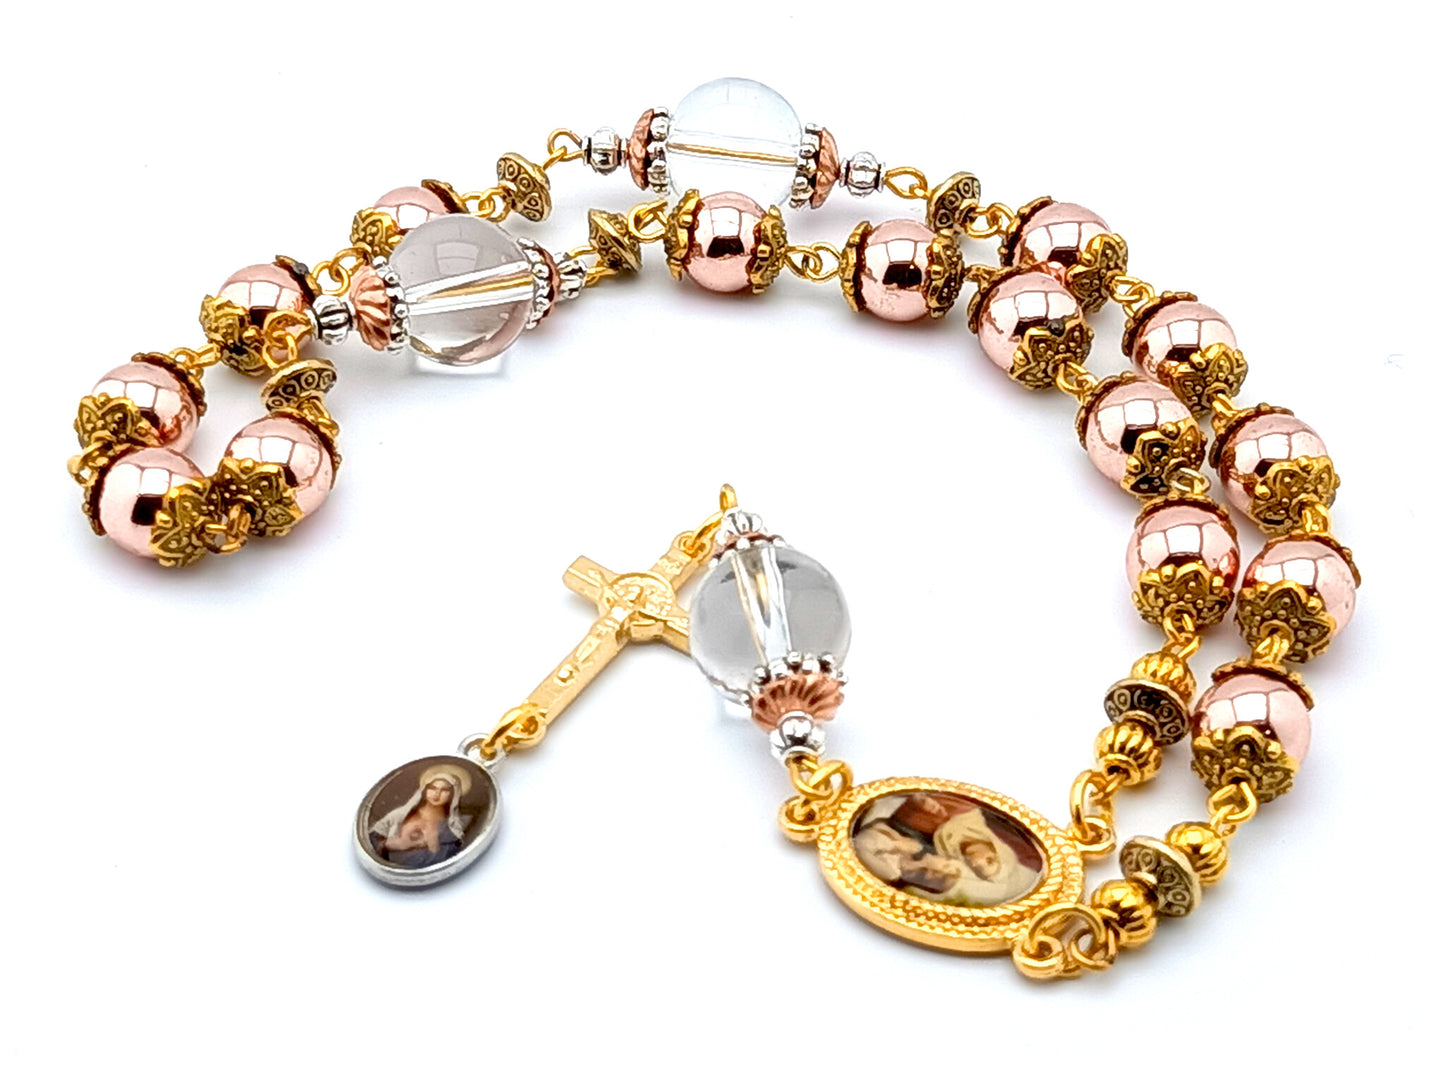 Saint Ann unique rosary beads prayer chaplet with gold hematite and crystal beads, gold picture centre medal and crucifix.